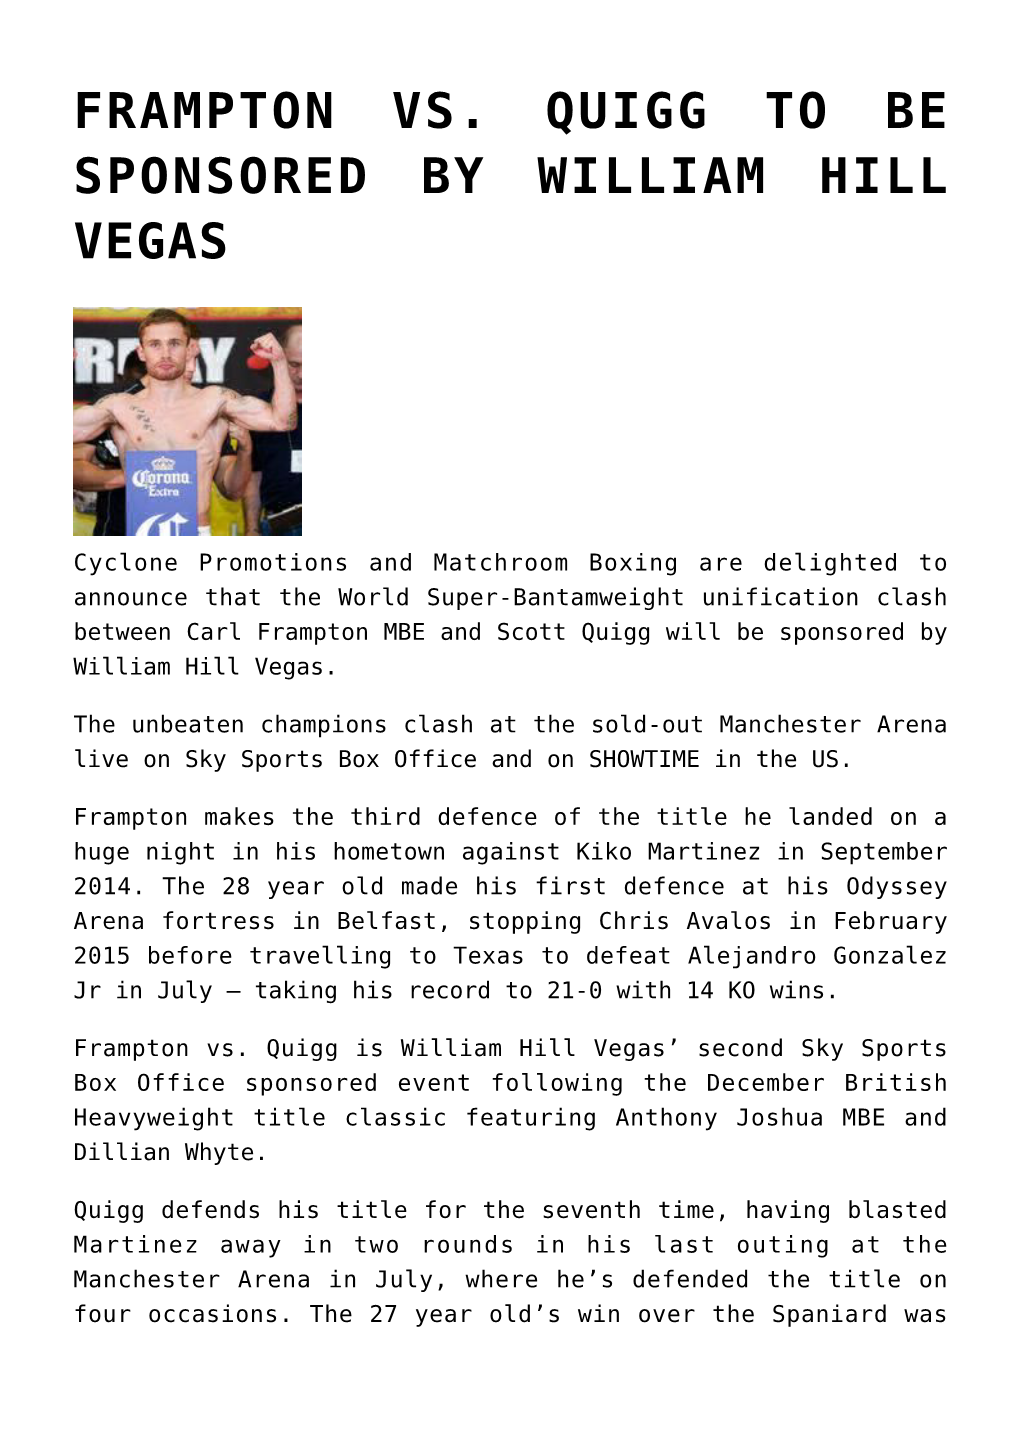 Frampton Vs. Quigg to Be Sponsored by William Hill Vegas